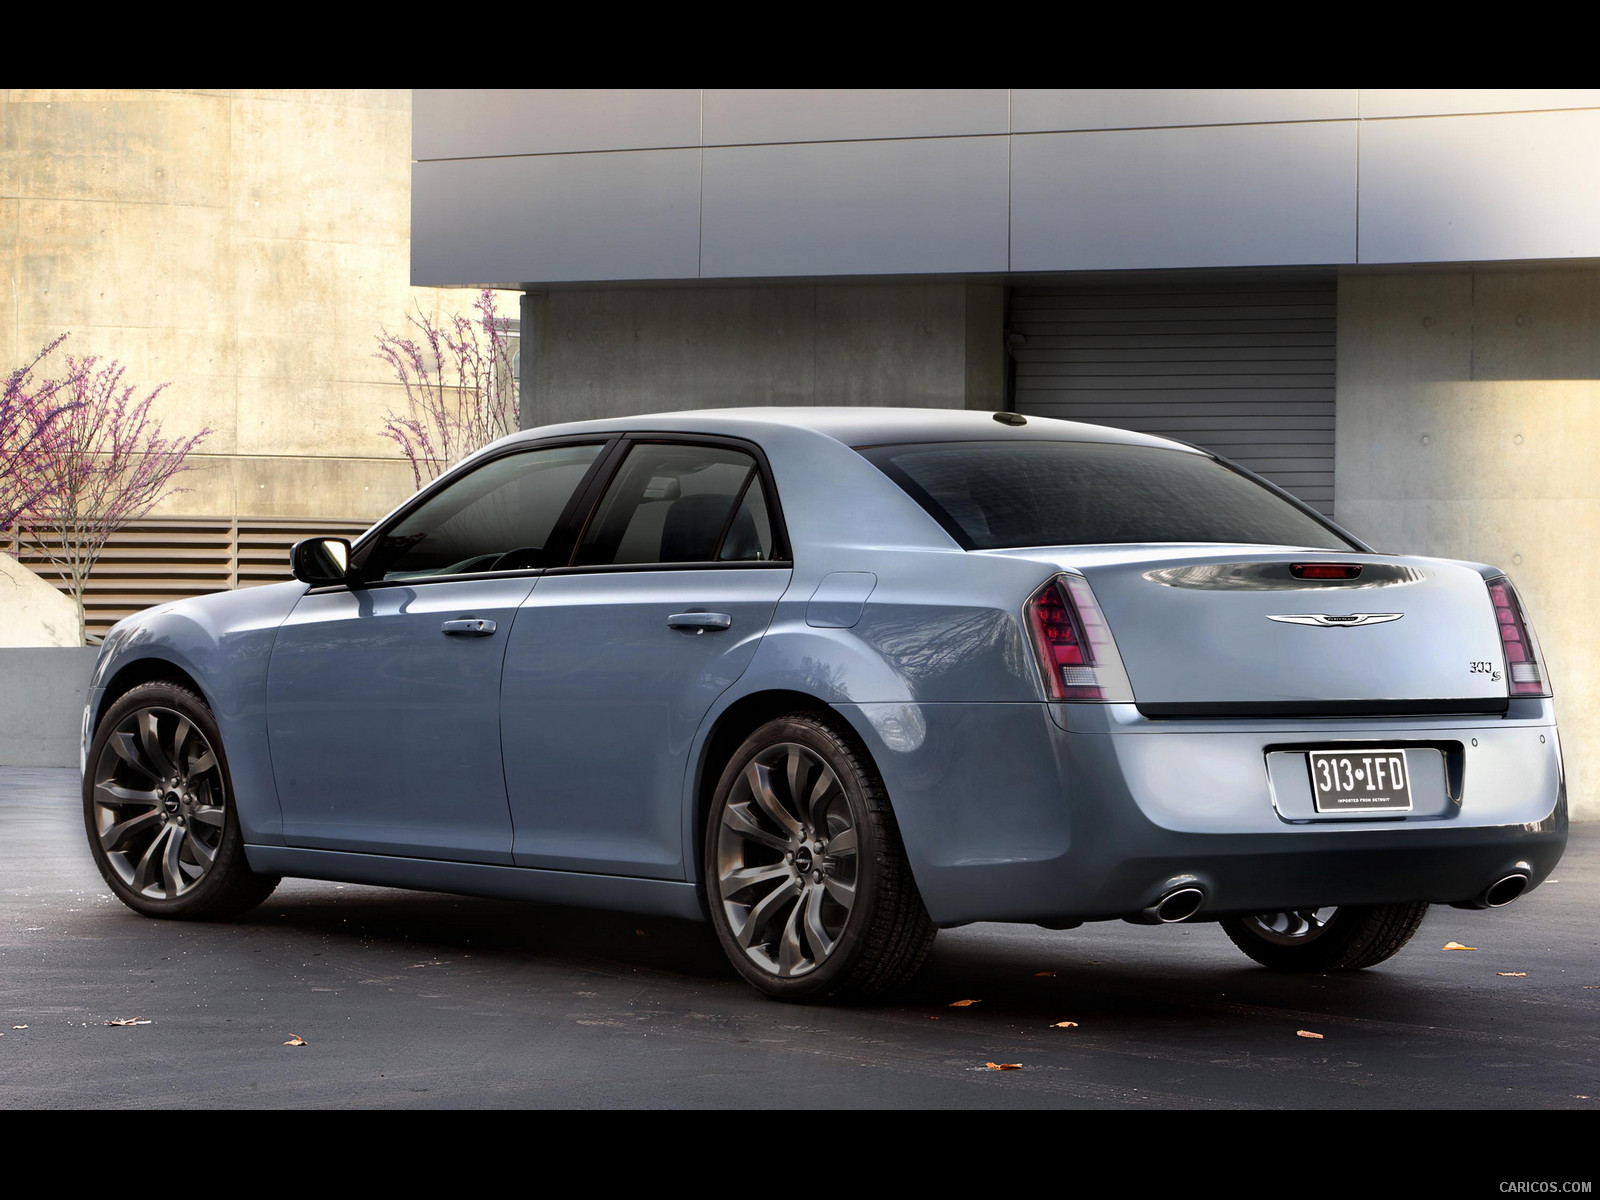 2011 Chrysler 300 for sale in los angeles #5